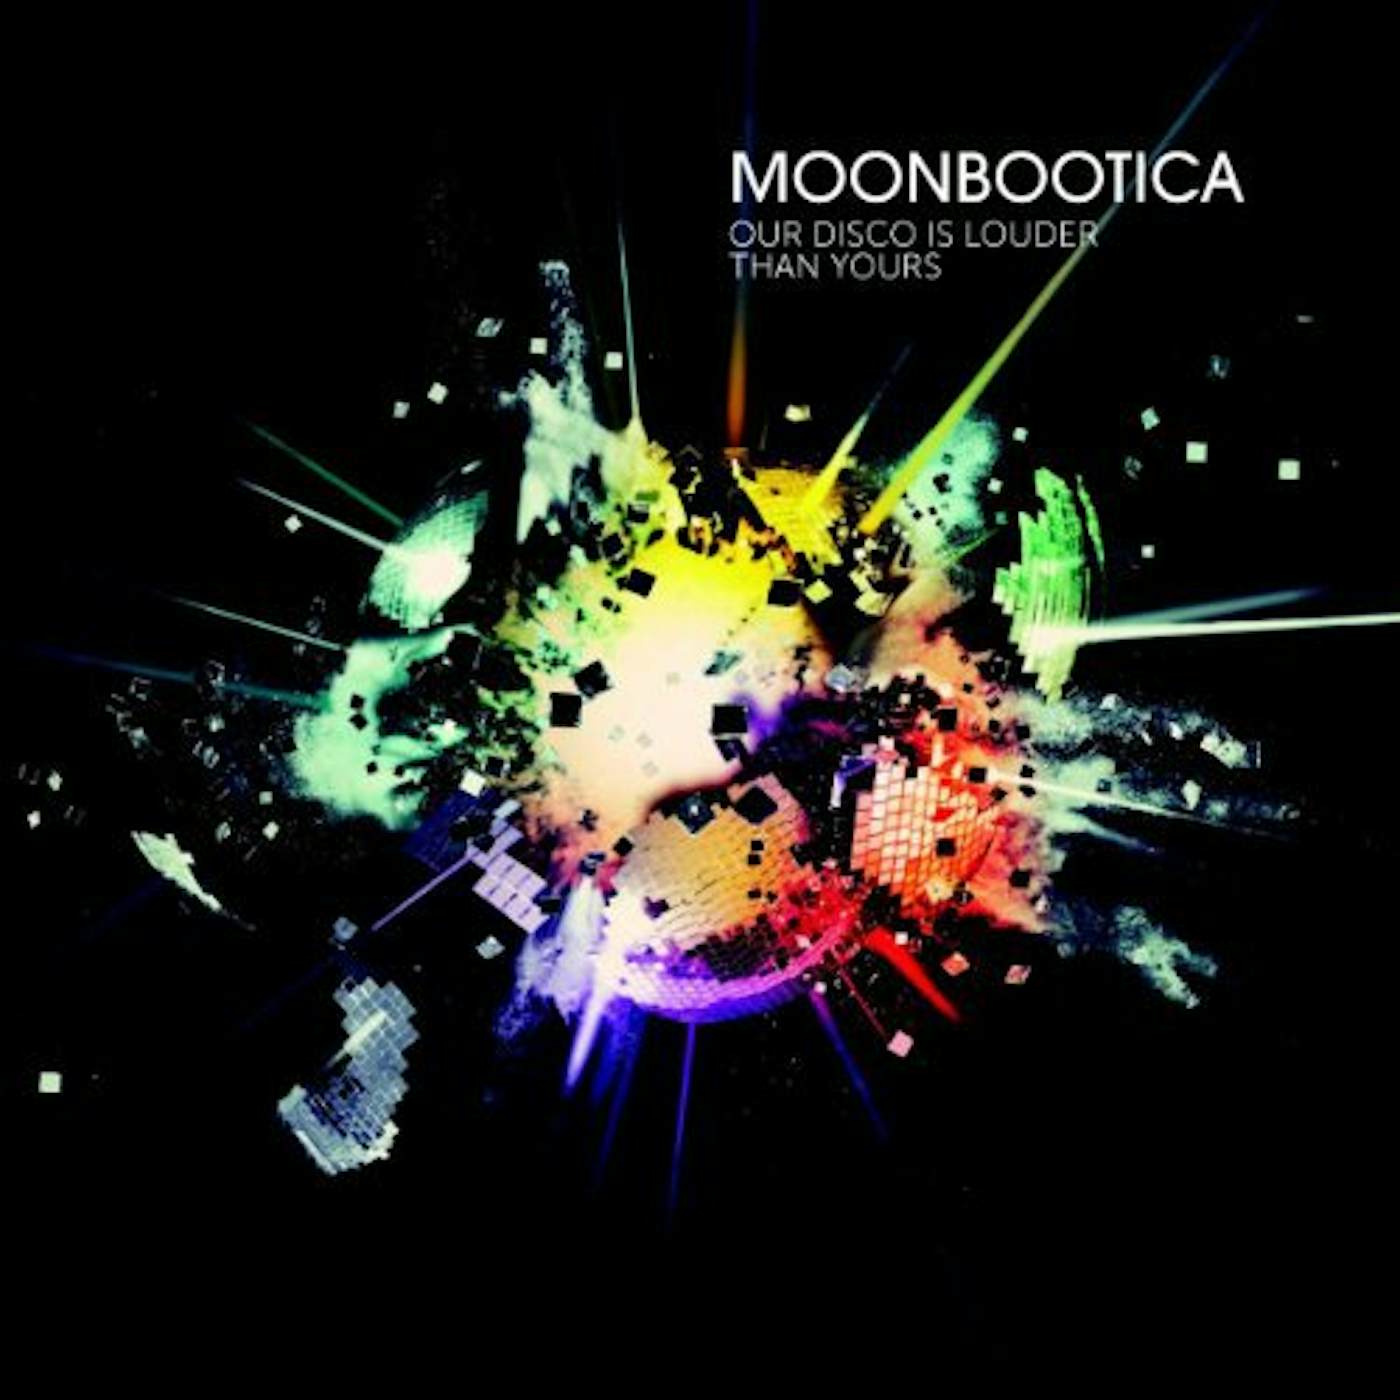 Moonbootica Our Disco Is Louder Than Yours Vinyl Record